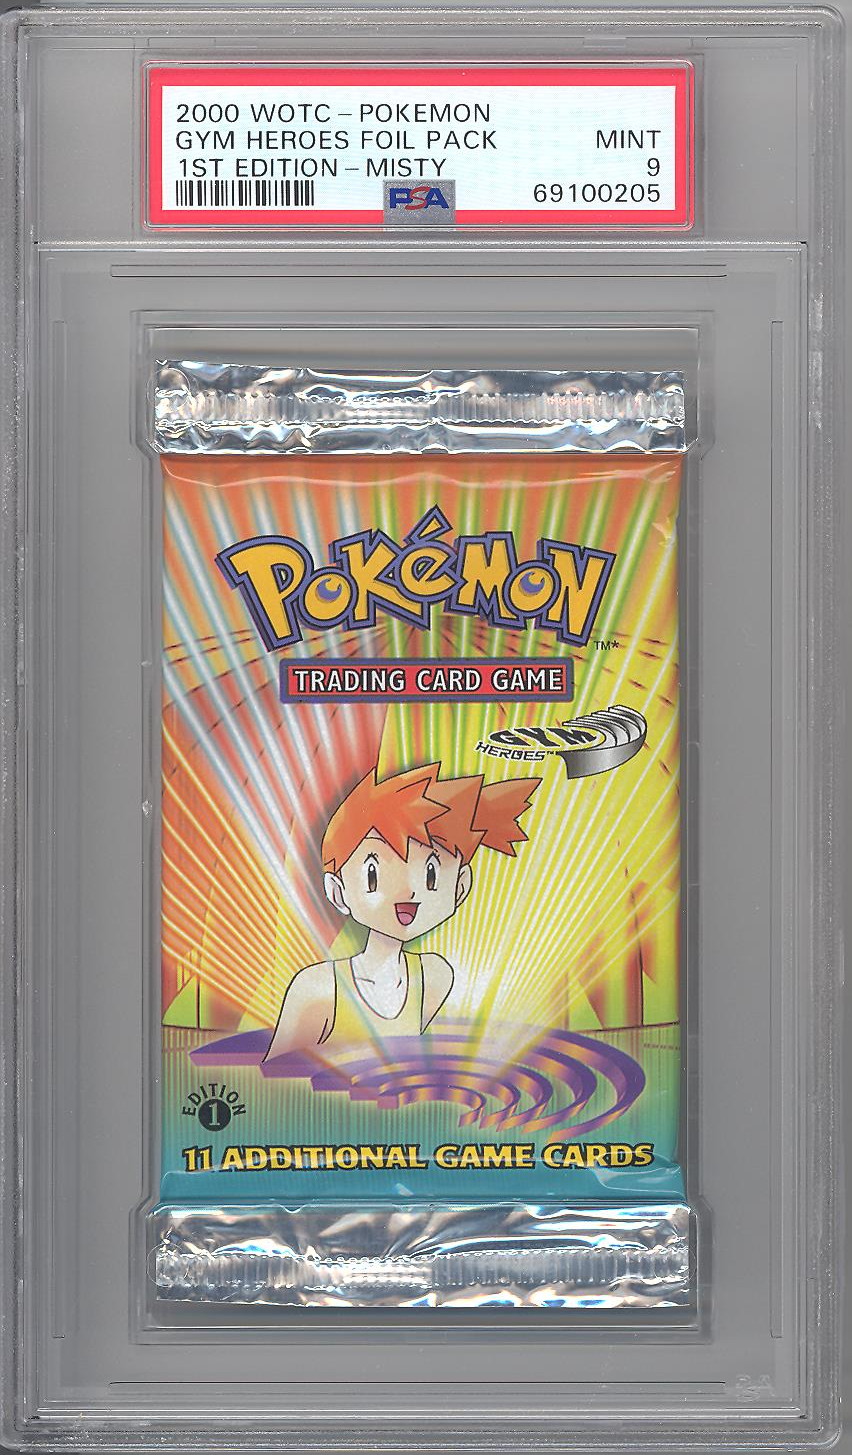 PSA 9 - Pokemon Cards - GYM HEROES - Booster Pack (1st Edition) - Misty Artwork - MINT